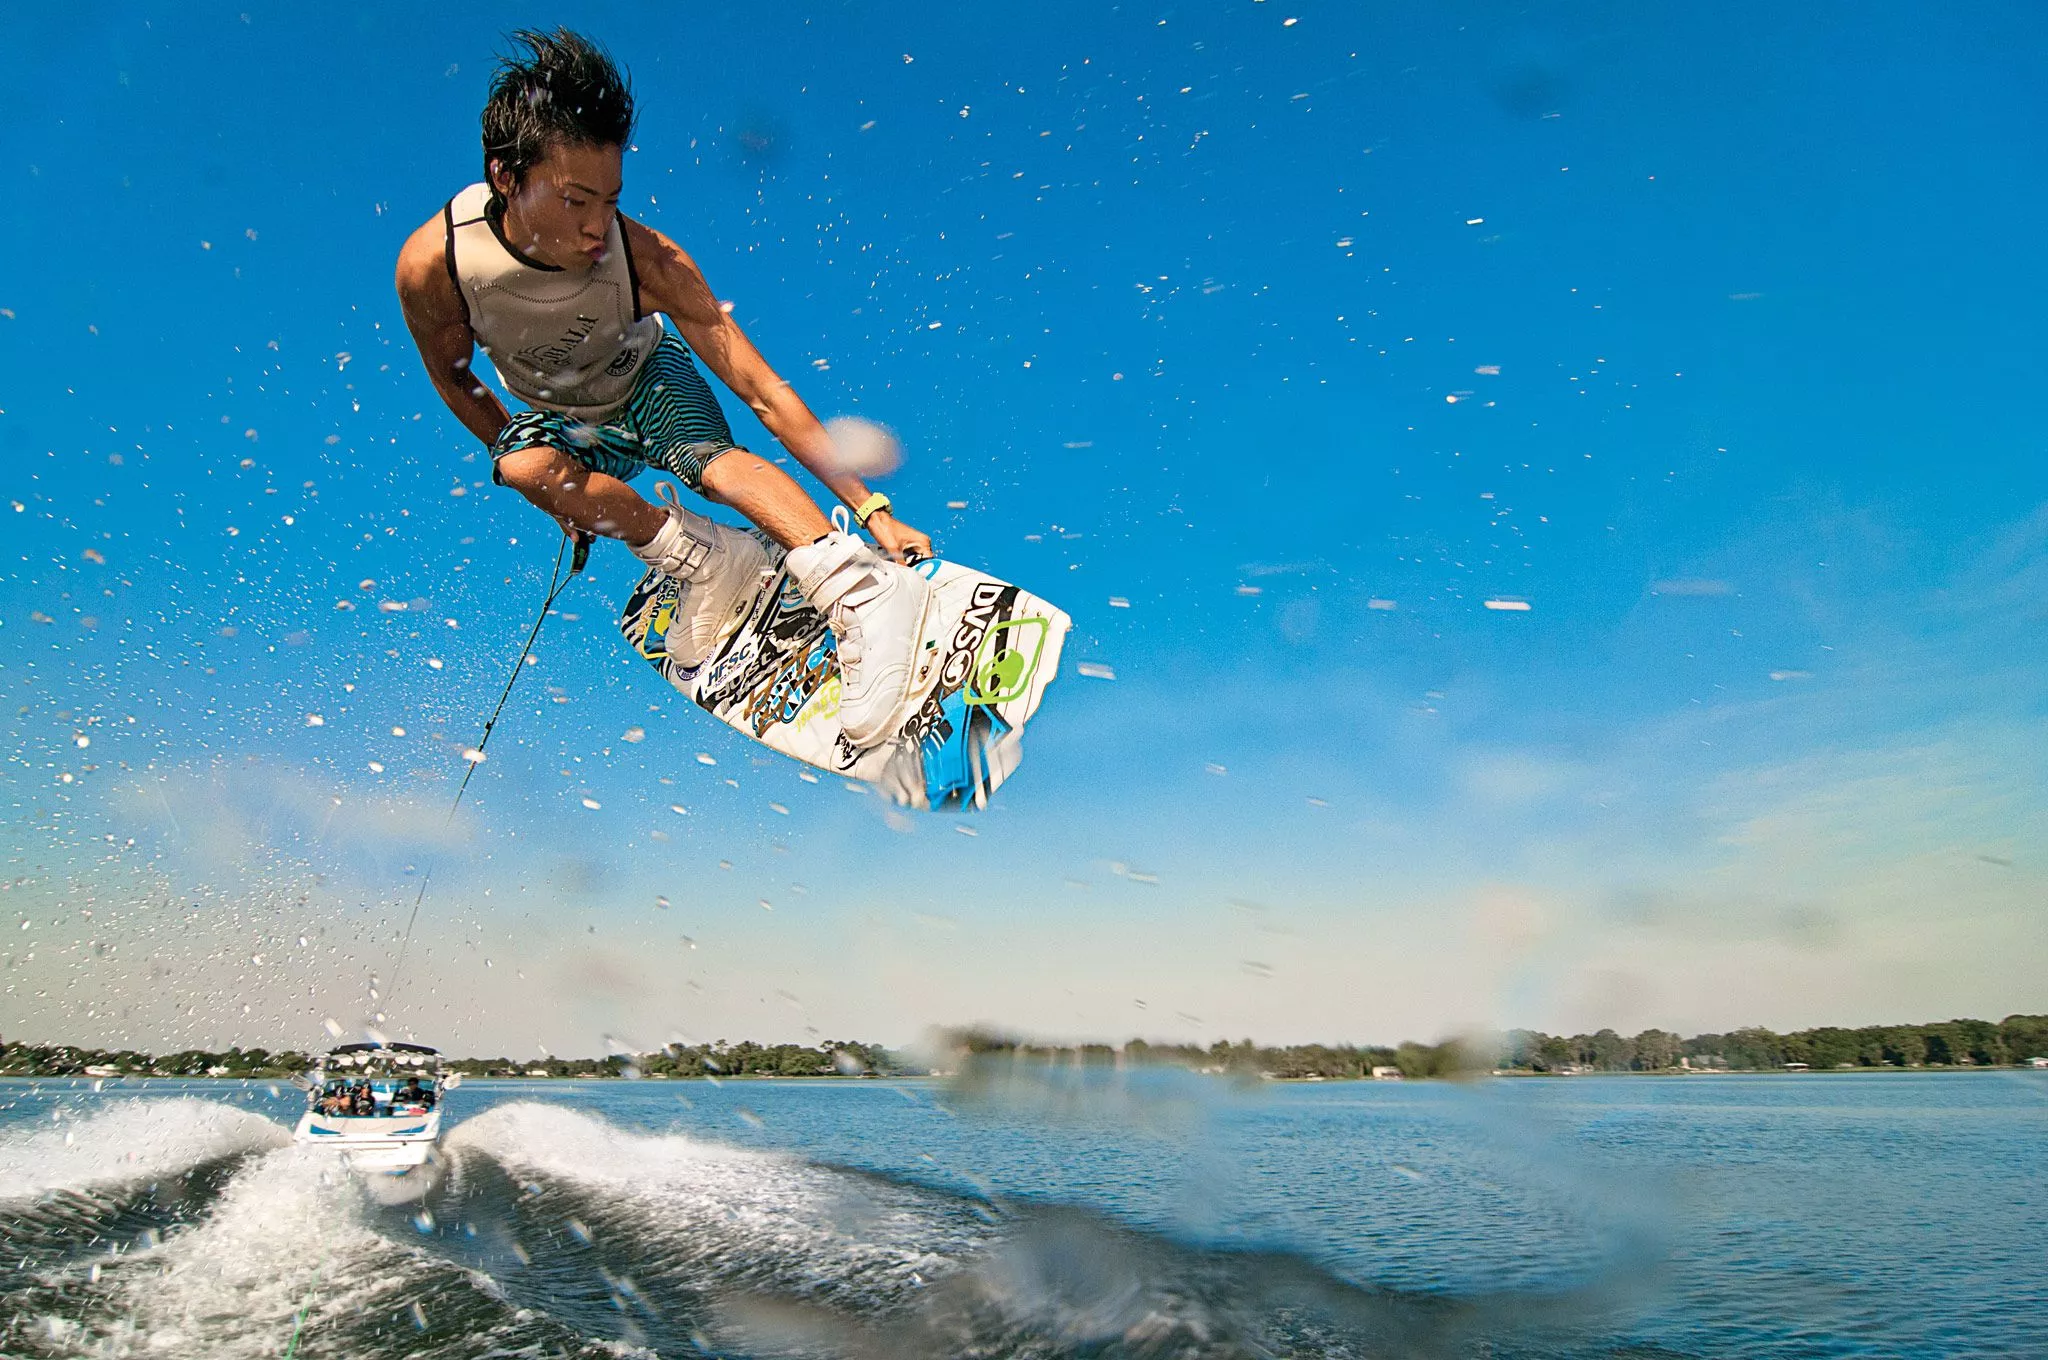 Bali Wake Park in Indonesia, Central Asia | Wakeboarding - Rated 7.7